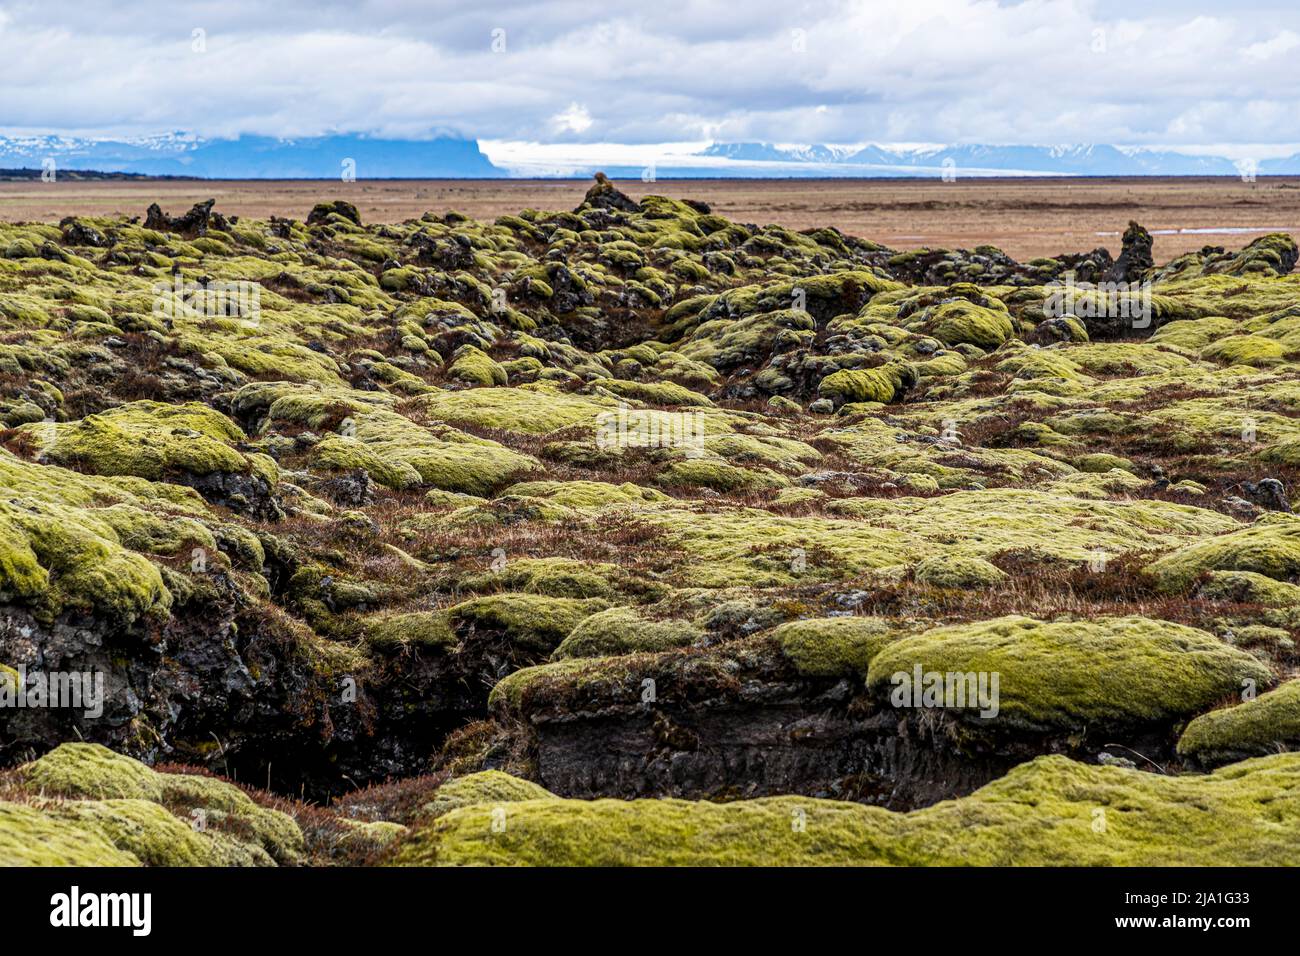 The Eldhraun (fire lava) is a huge lava field in Iceland, which today is mostly covered with moss. It is the largest lava field in the world and covers an area of 565 km². It was formed during the devastating Laki eruption in 1783/1784. Stock Photo